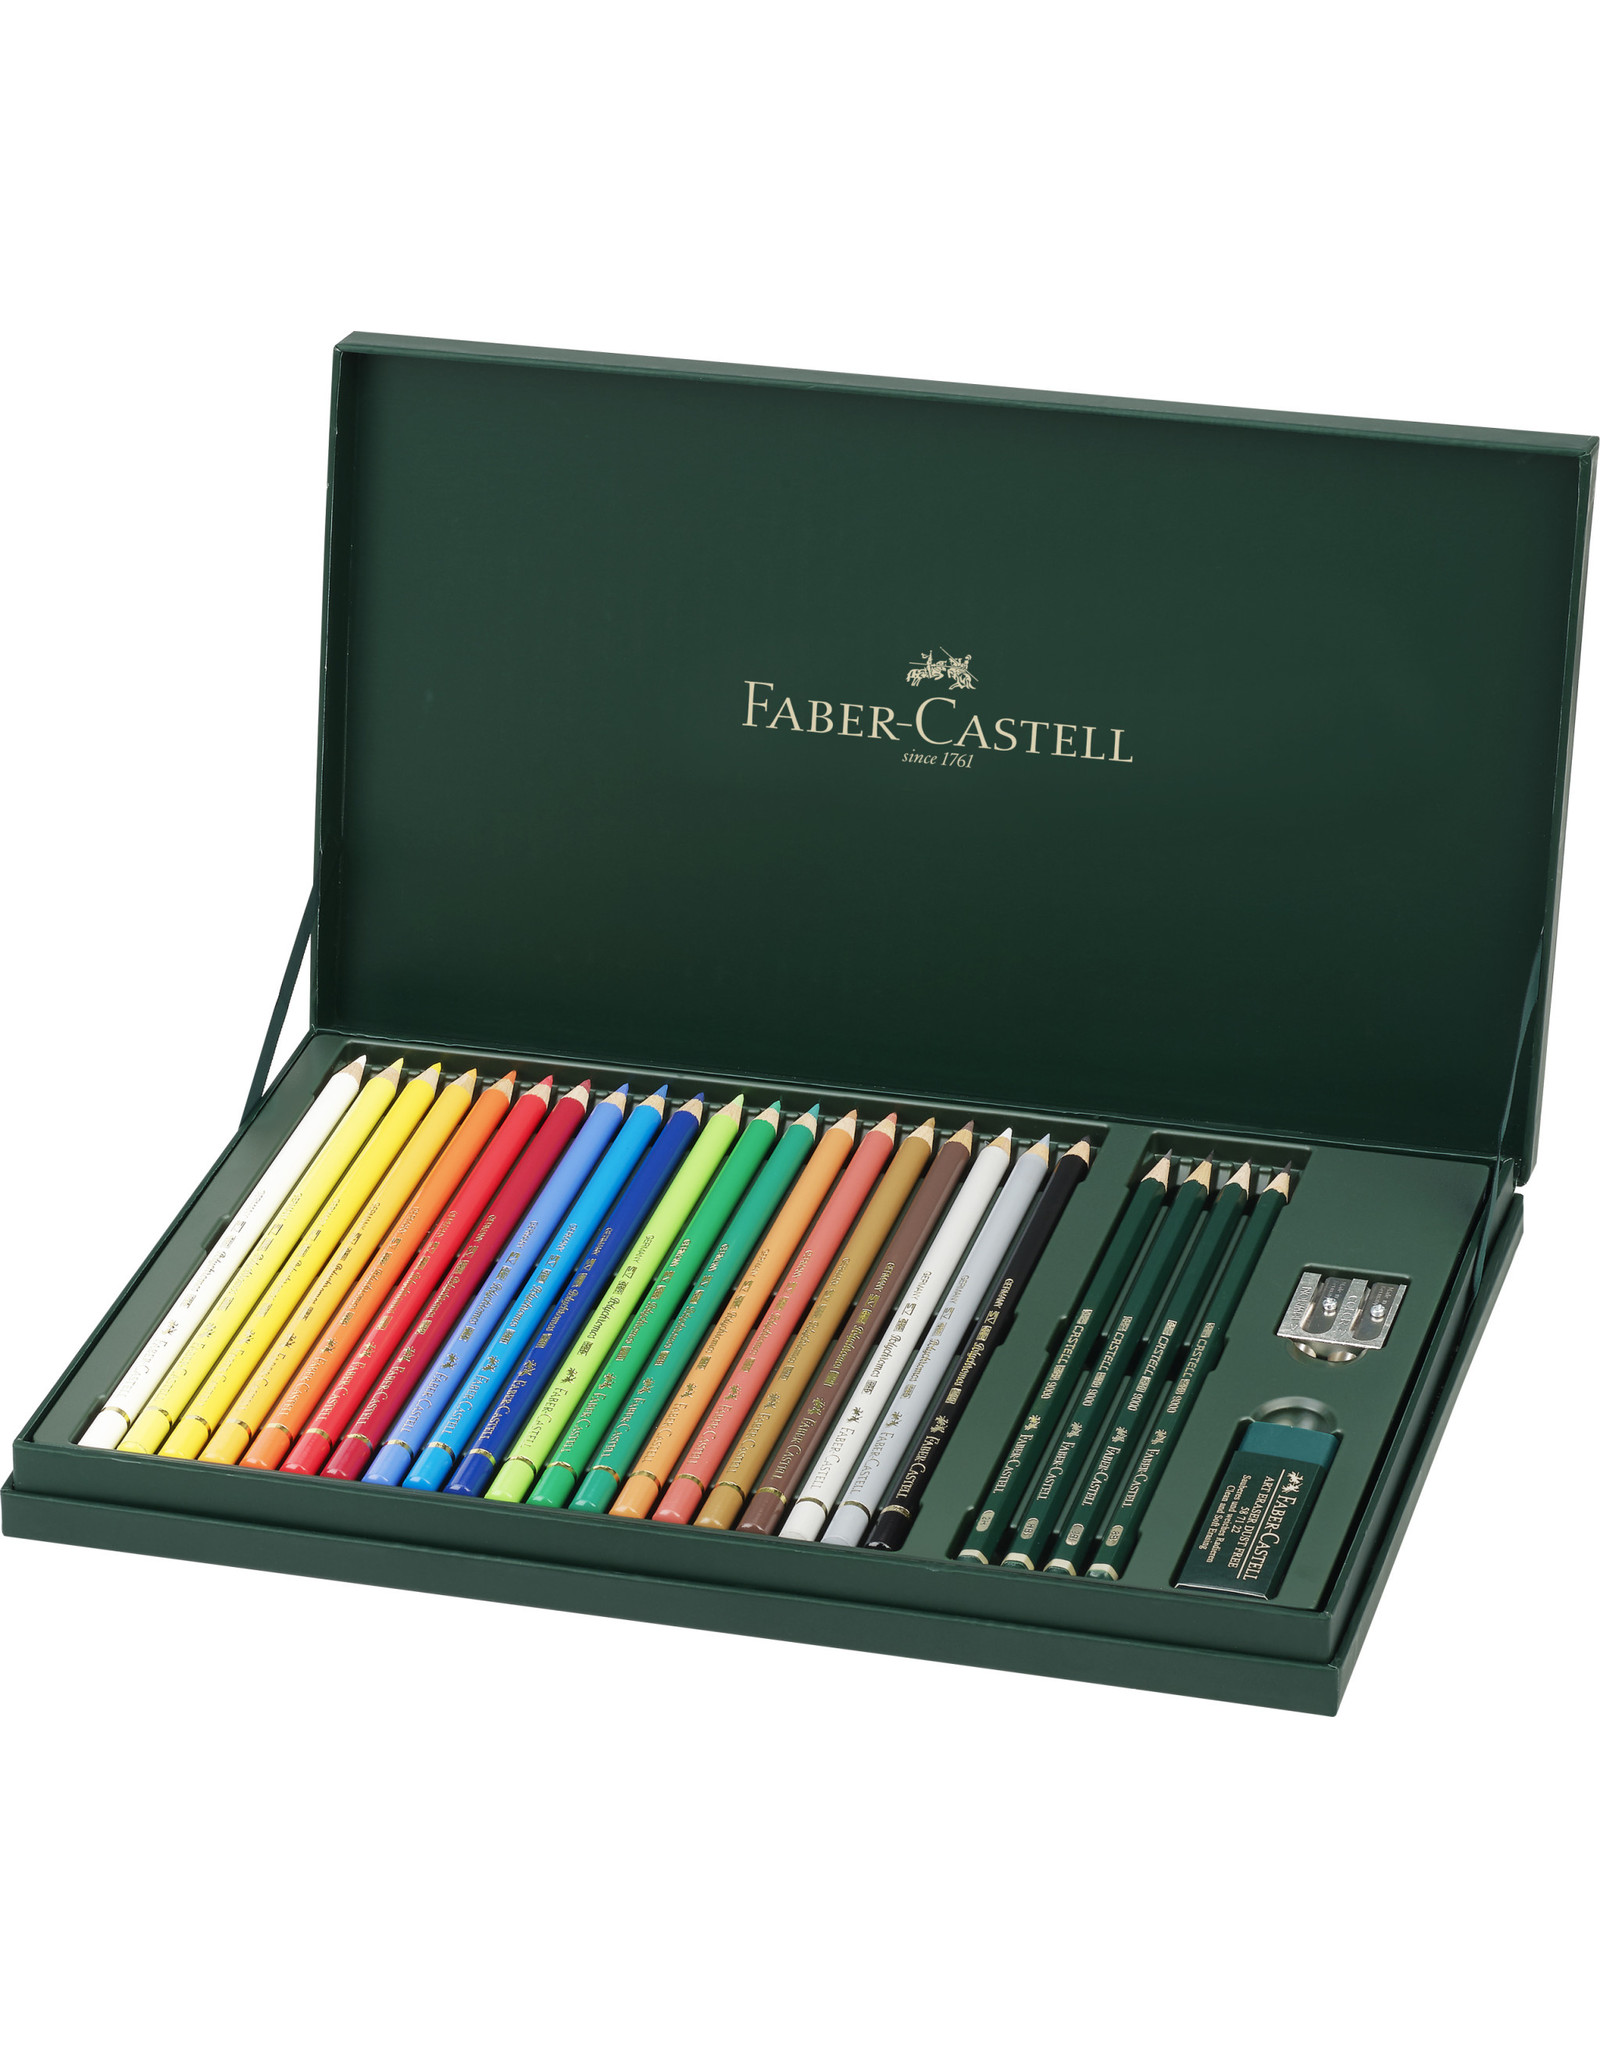 FABER-CASTELL Faber Castell Polychromos, Gift Set and Accessories